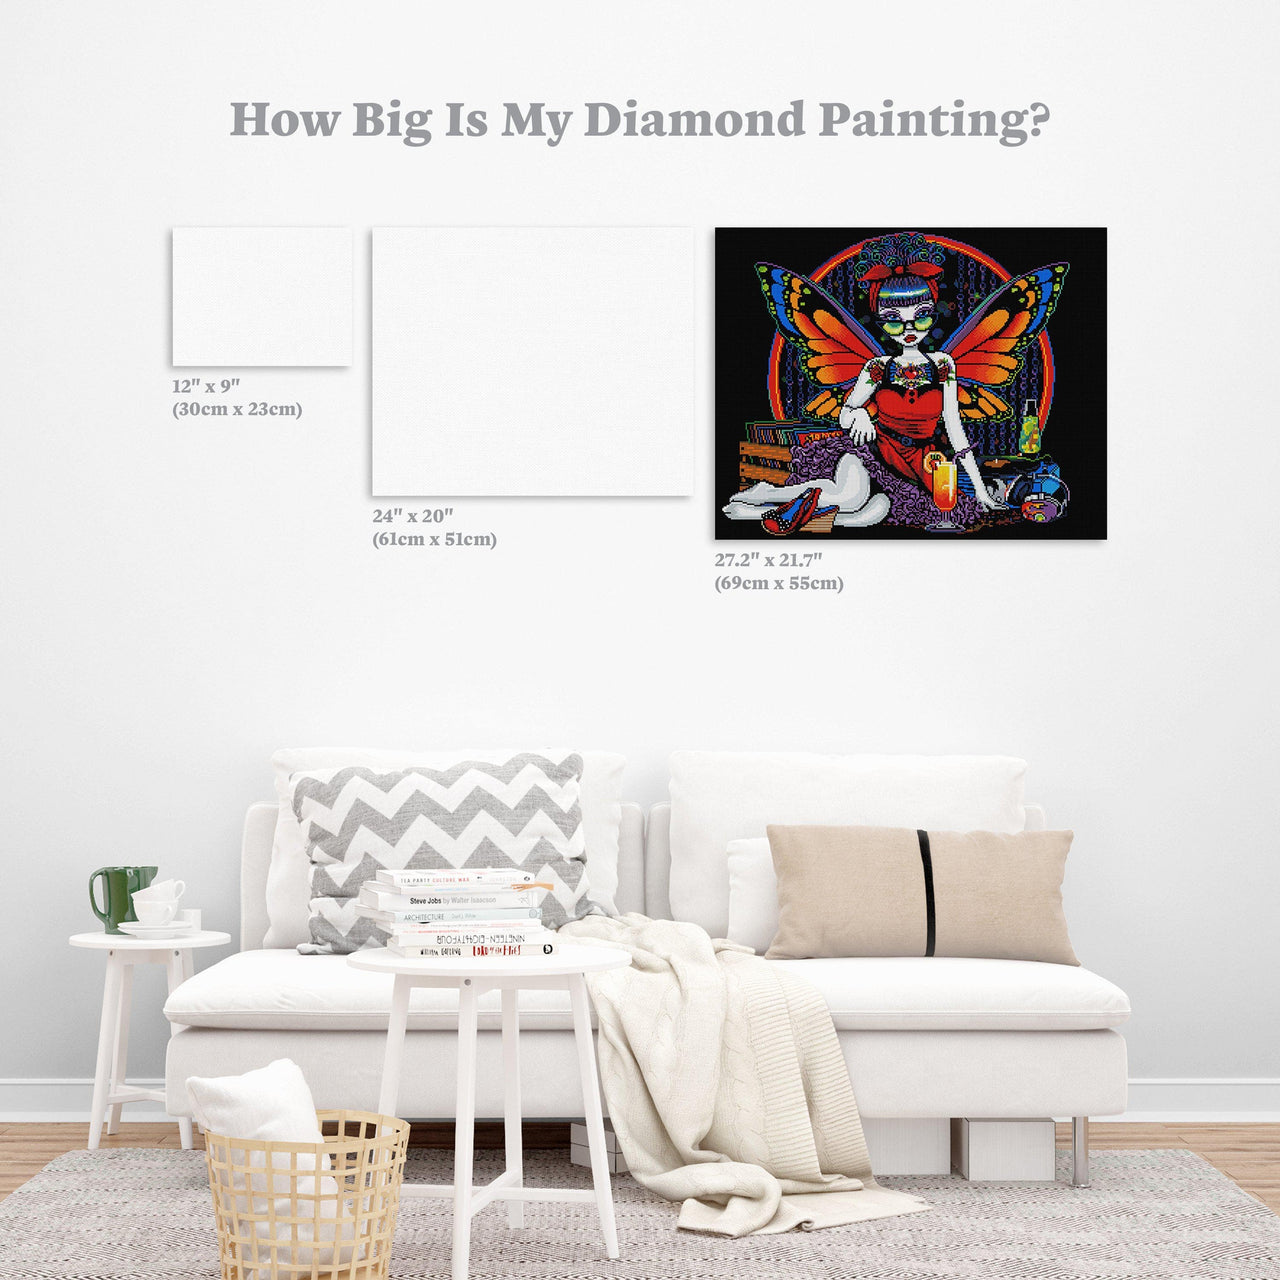 Diamond Painting Betsylynn 21.7" x 27.2″ (55cm x 69cm) / Square With 42 Colors Including 2 ABs / 58,536